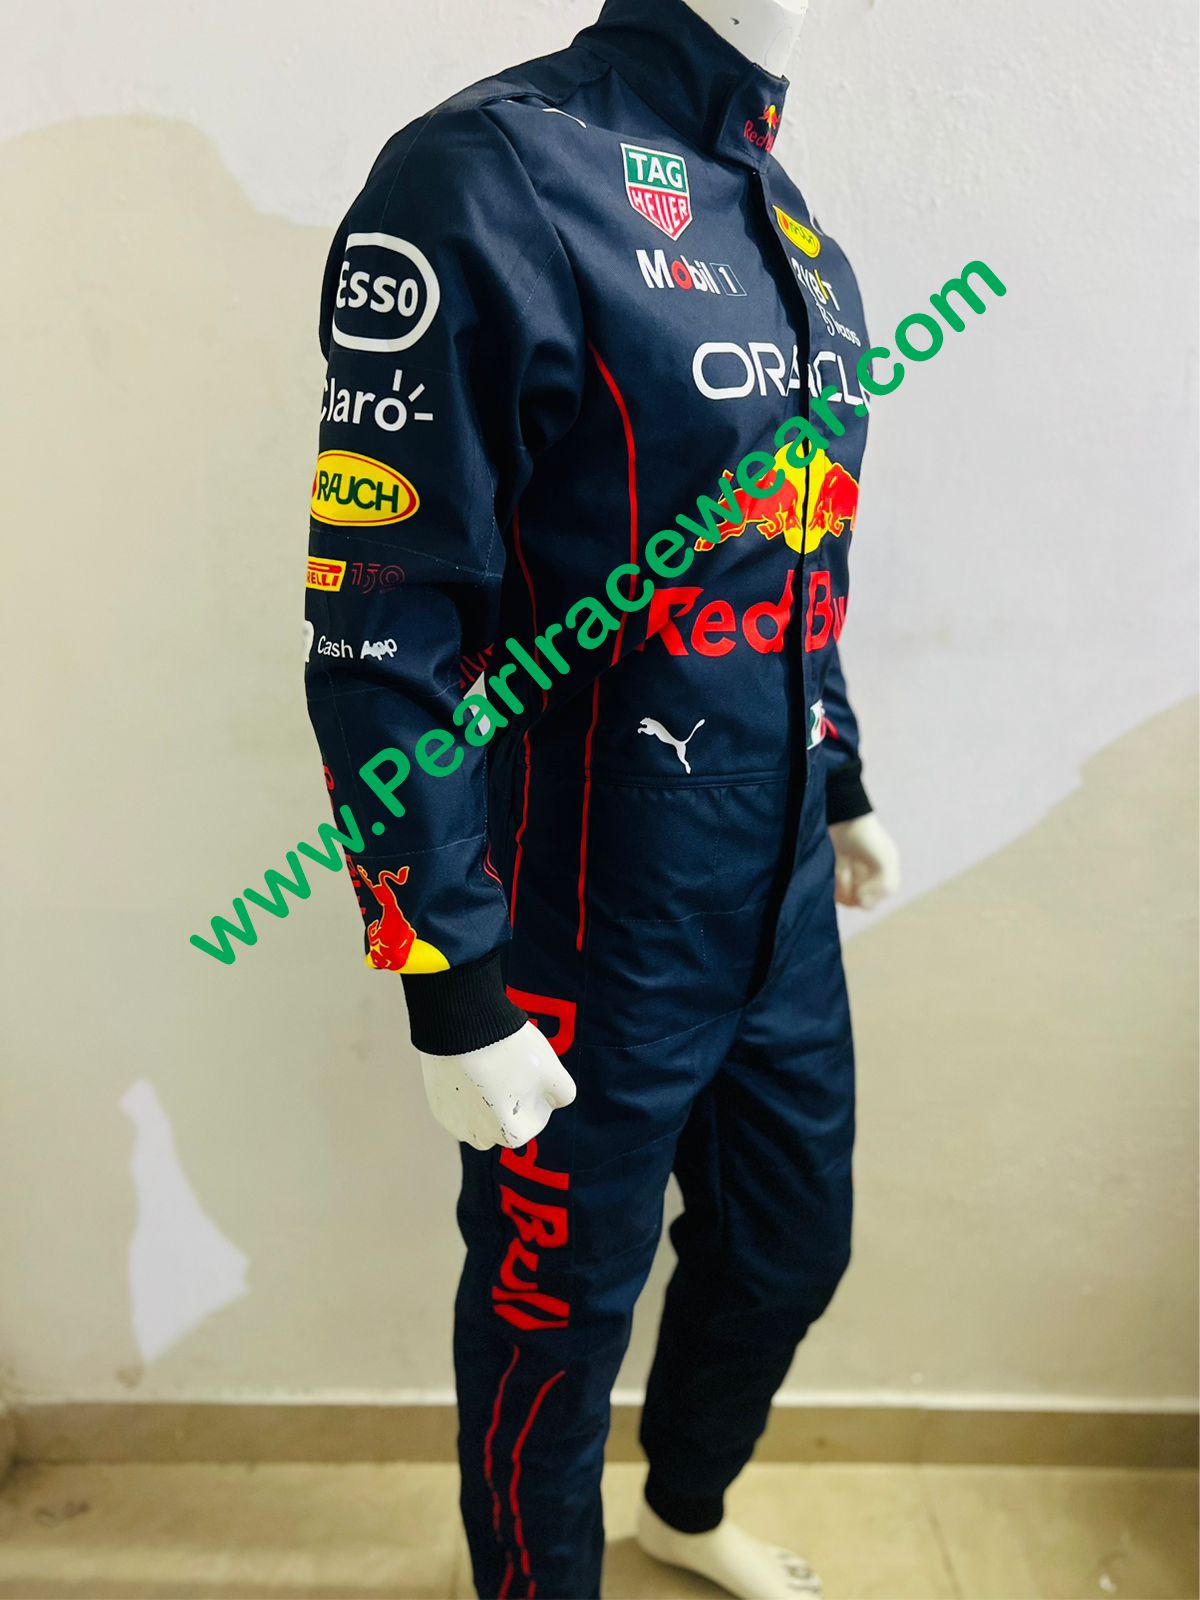 F1 Driver RedBull MAX 2023 Printed Race Suit